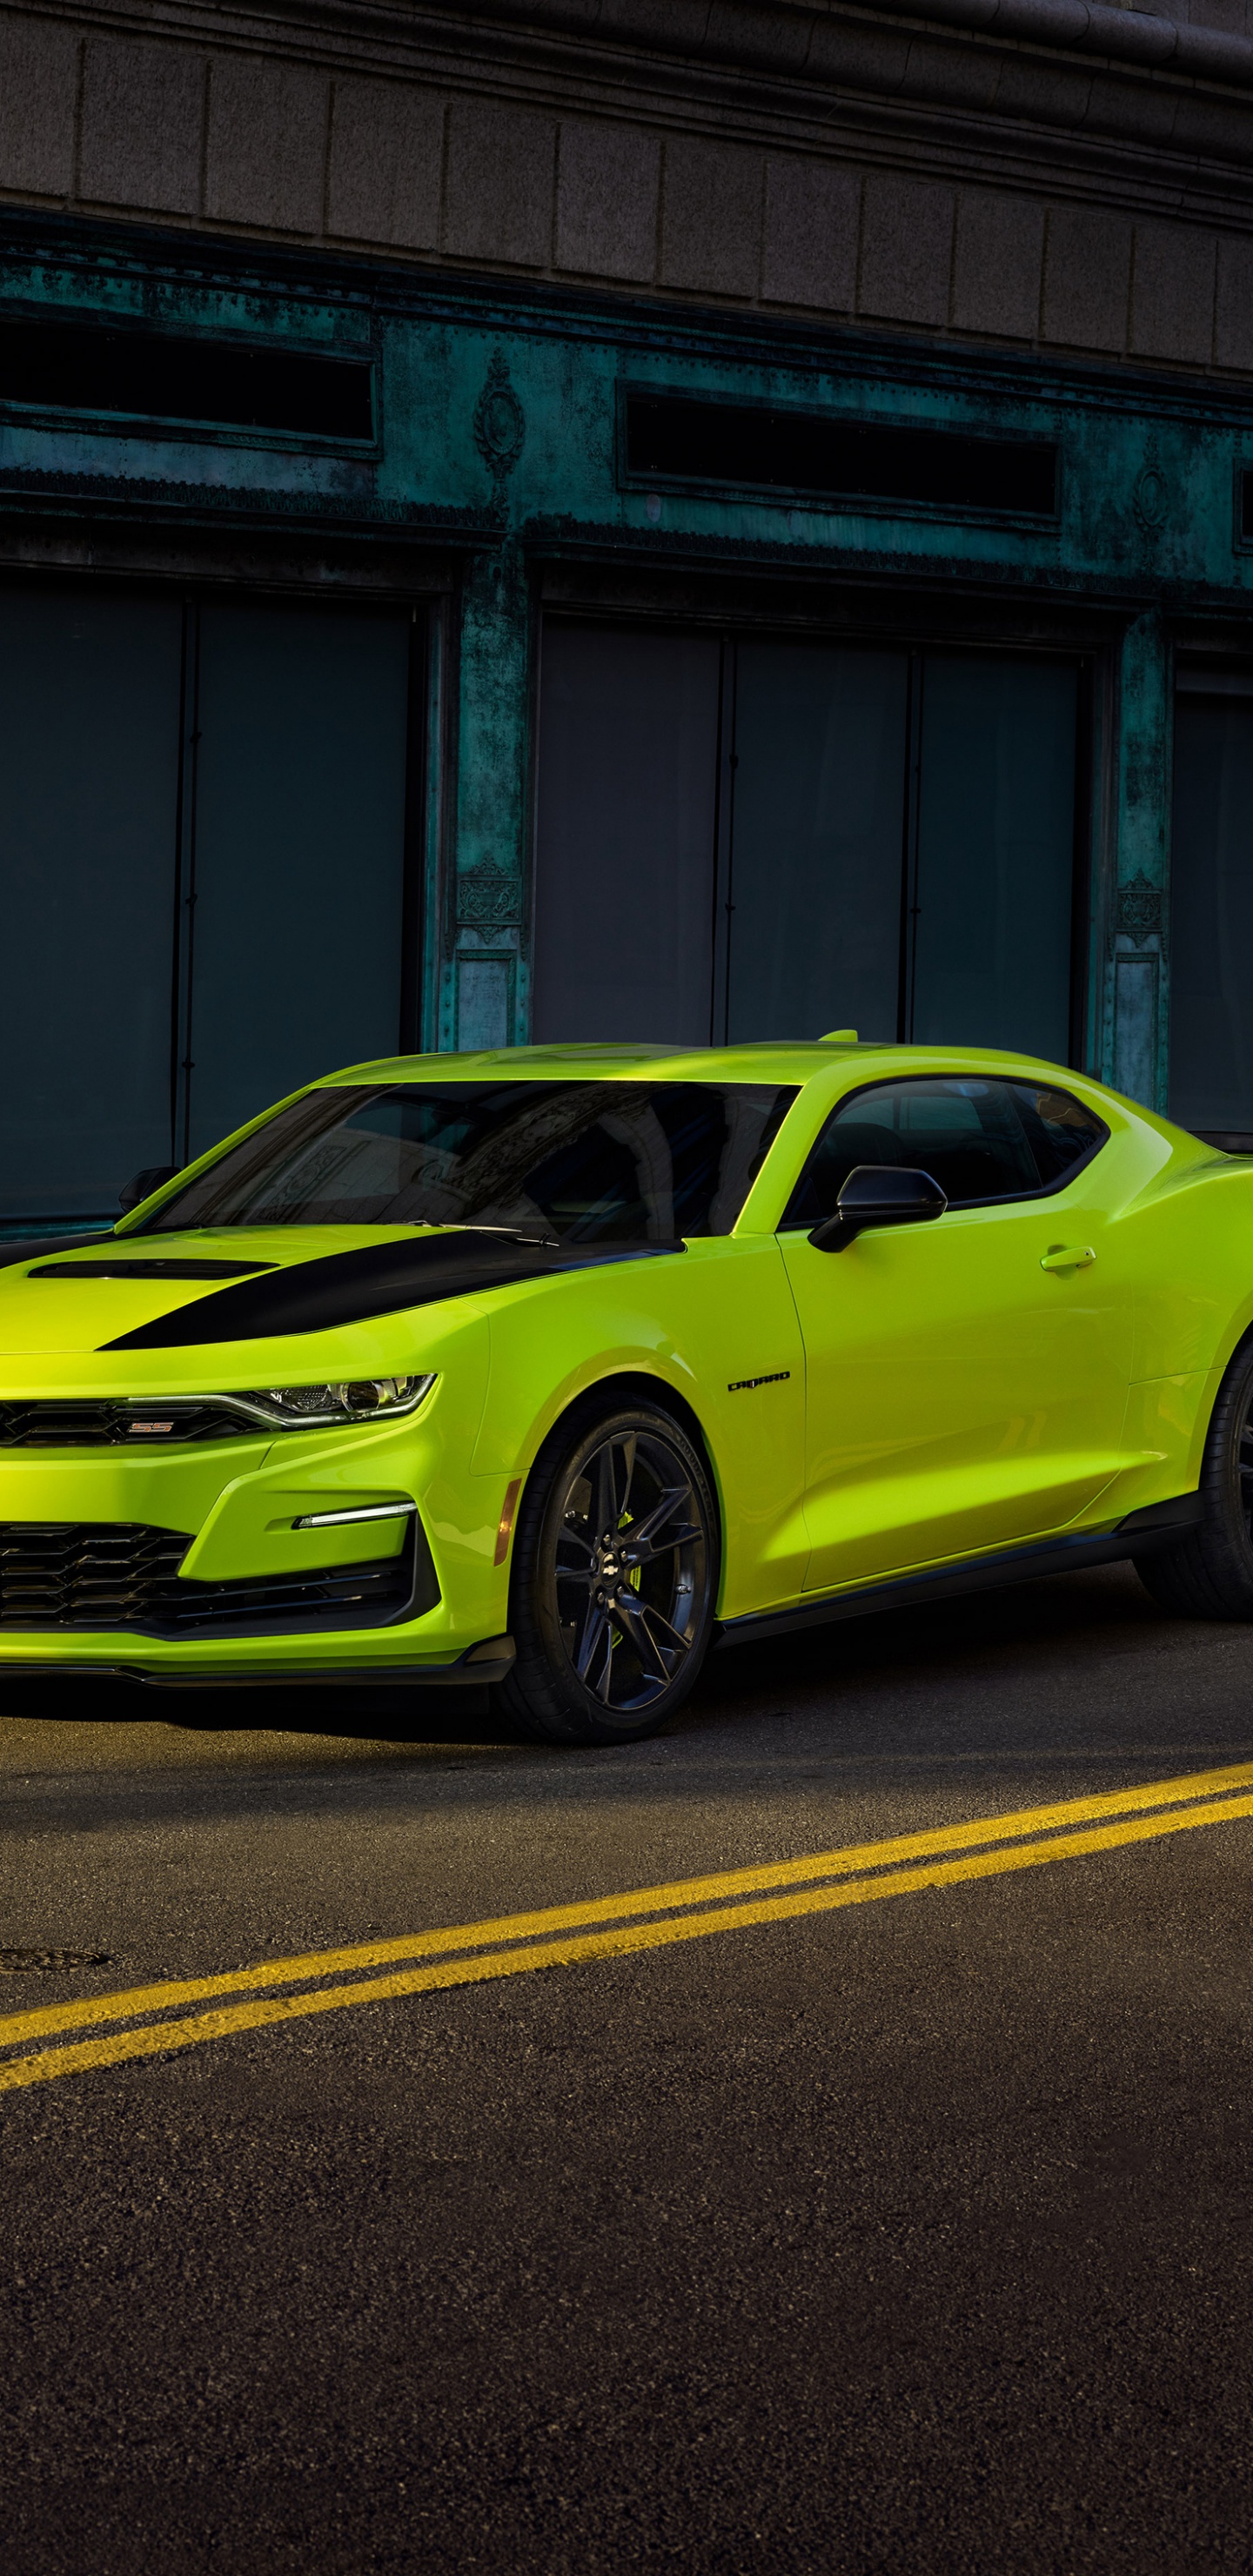 1440x2960 Chevrolet Camaro Wallpapers for Samsung Galaxy S8/S8+/S9/S9+/Note  8/Note 9 QHD